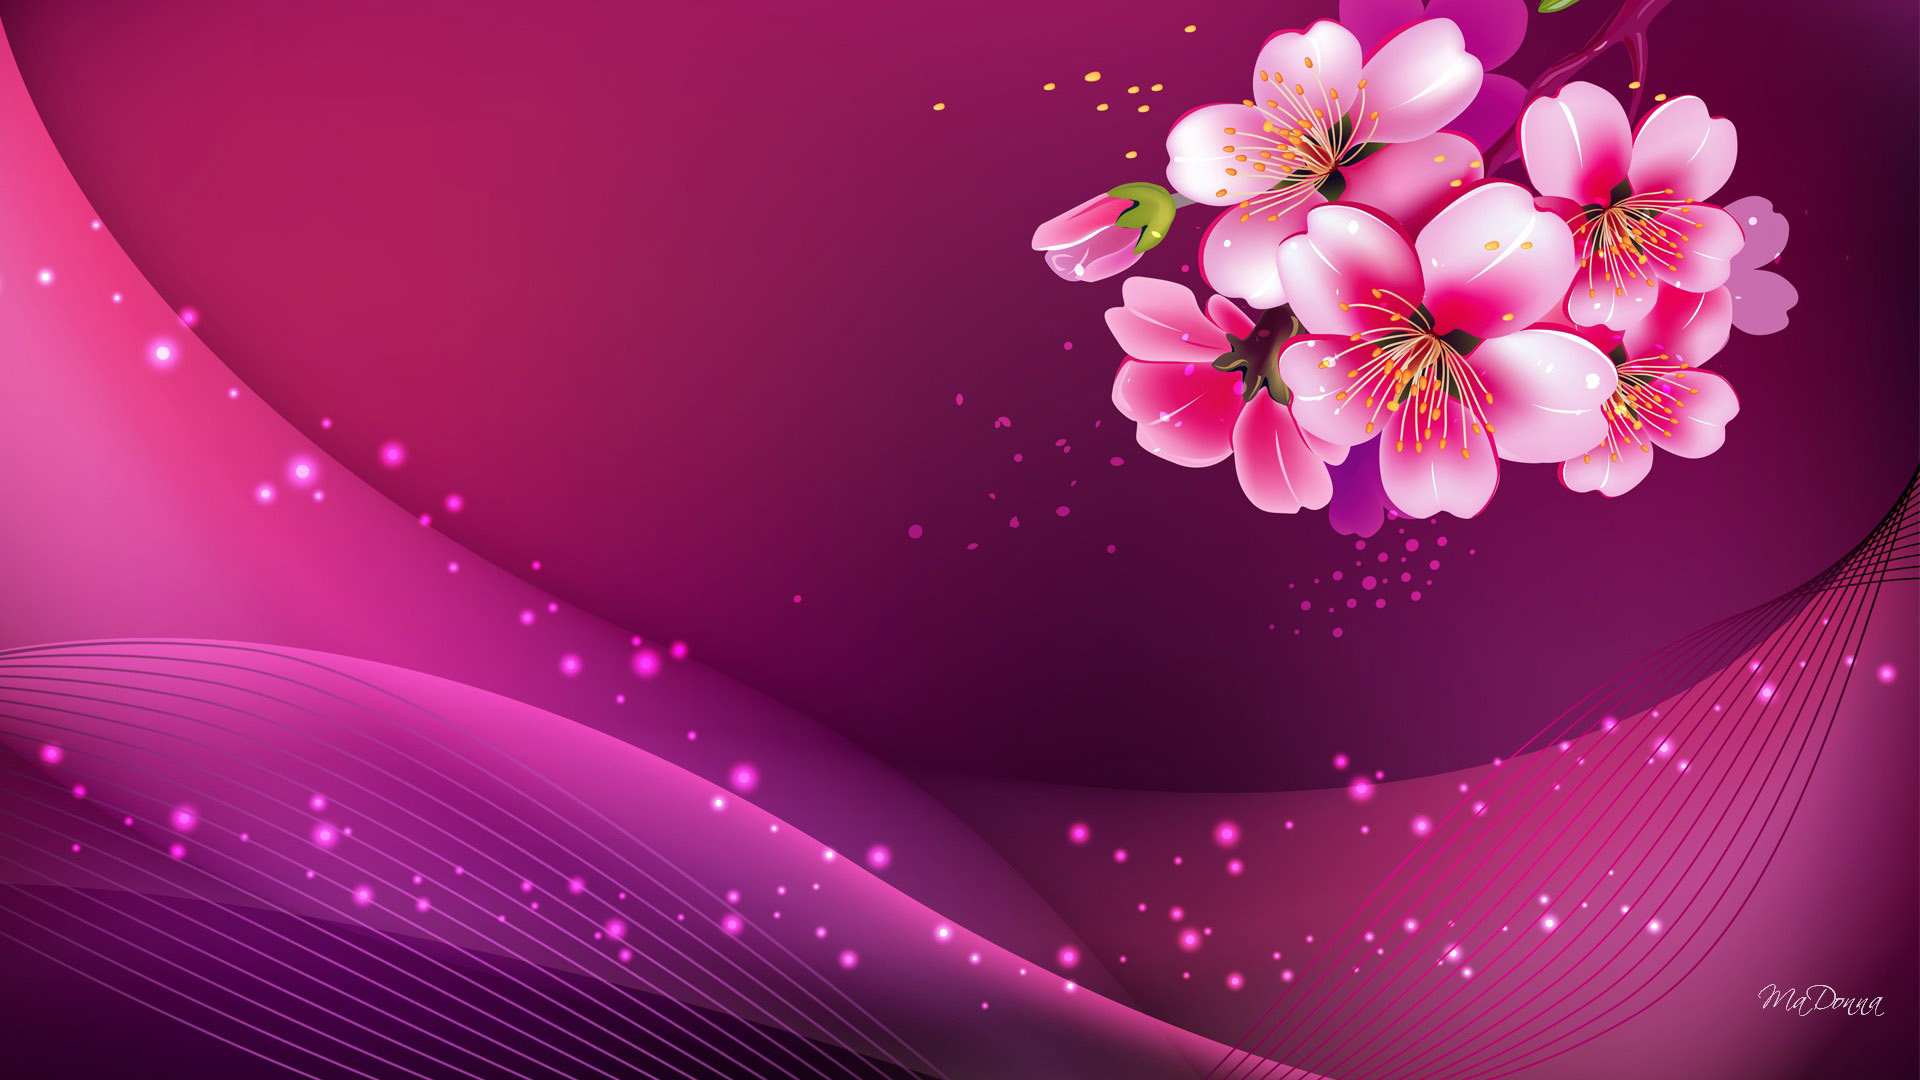 dark pink abstract background with flowers